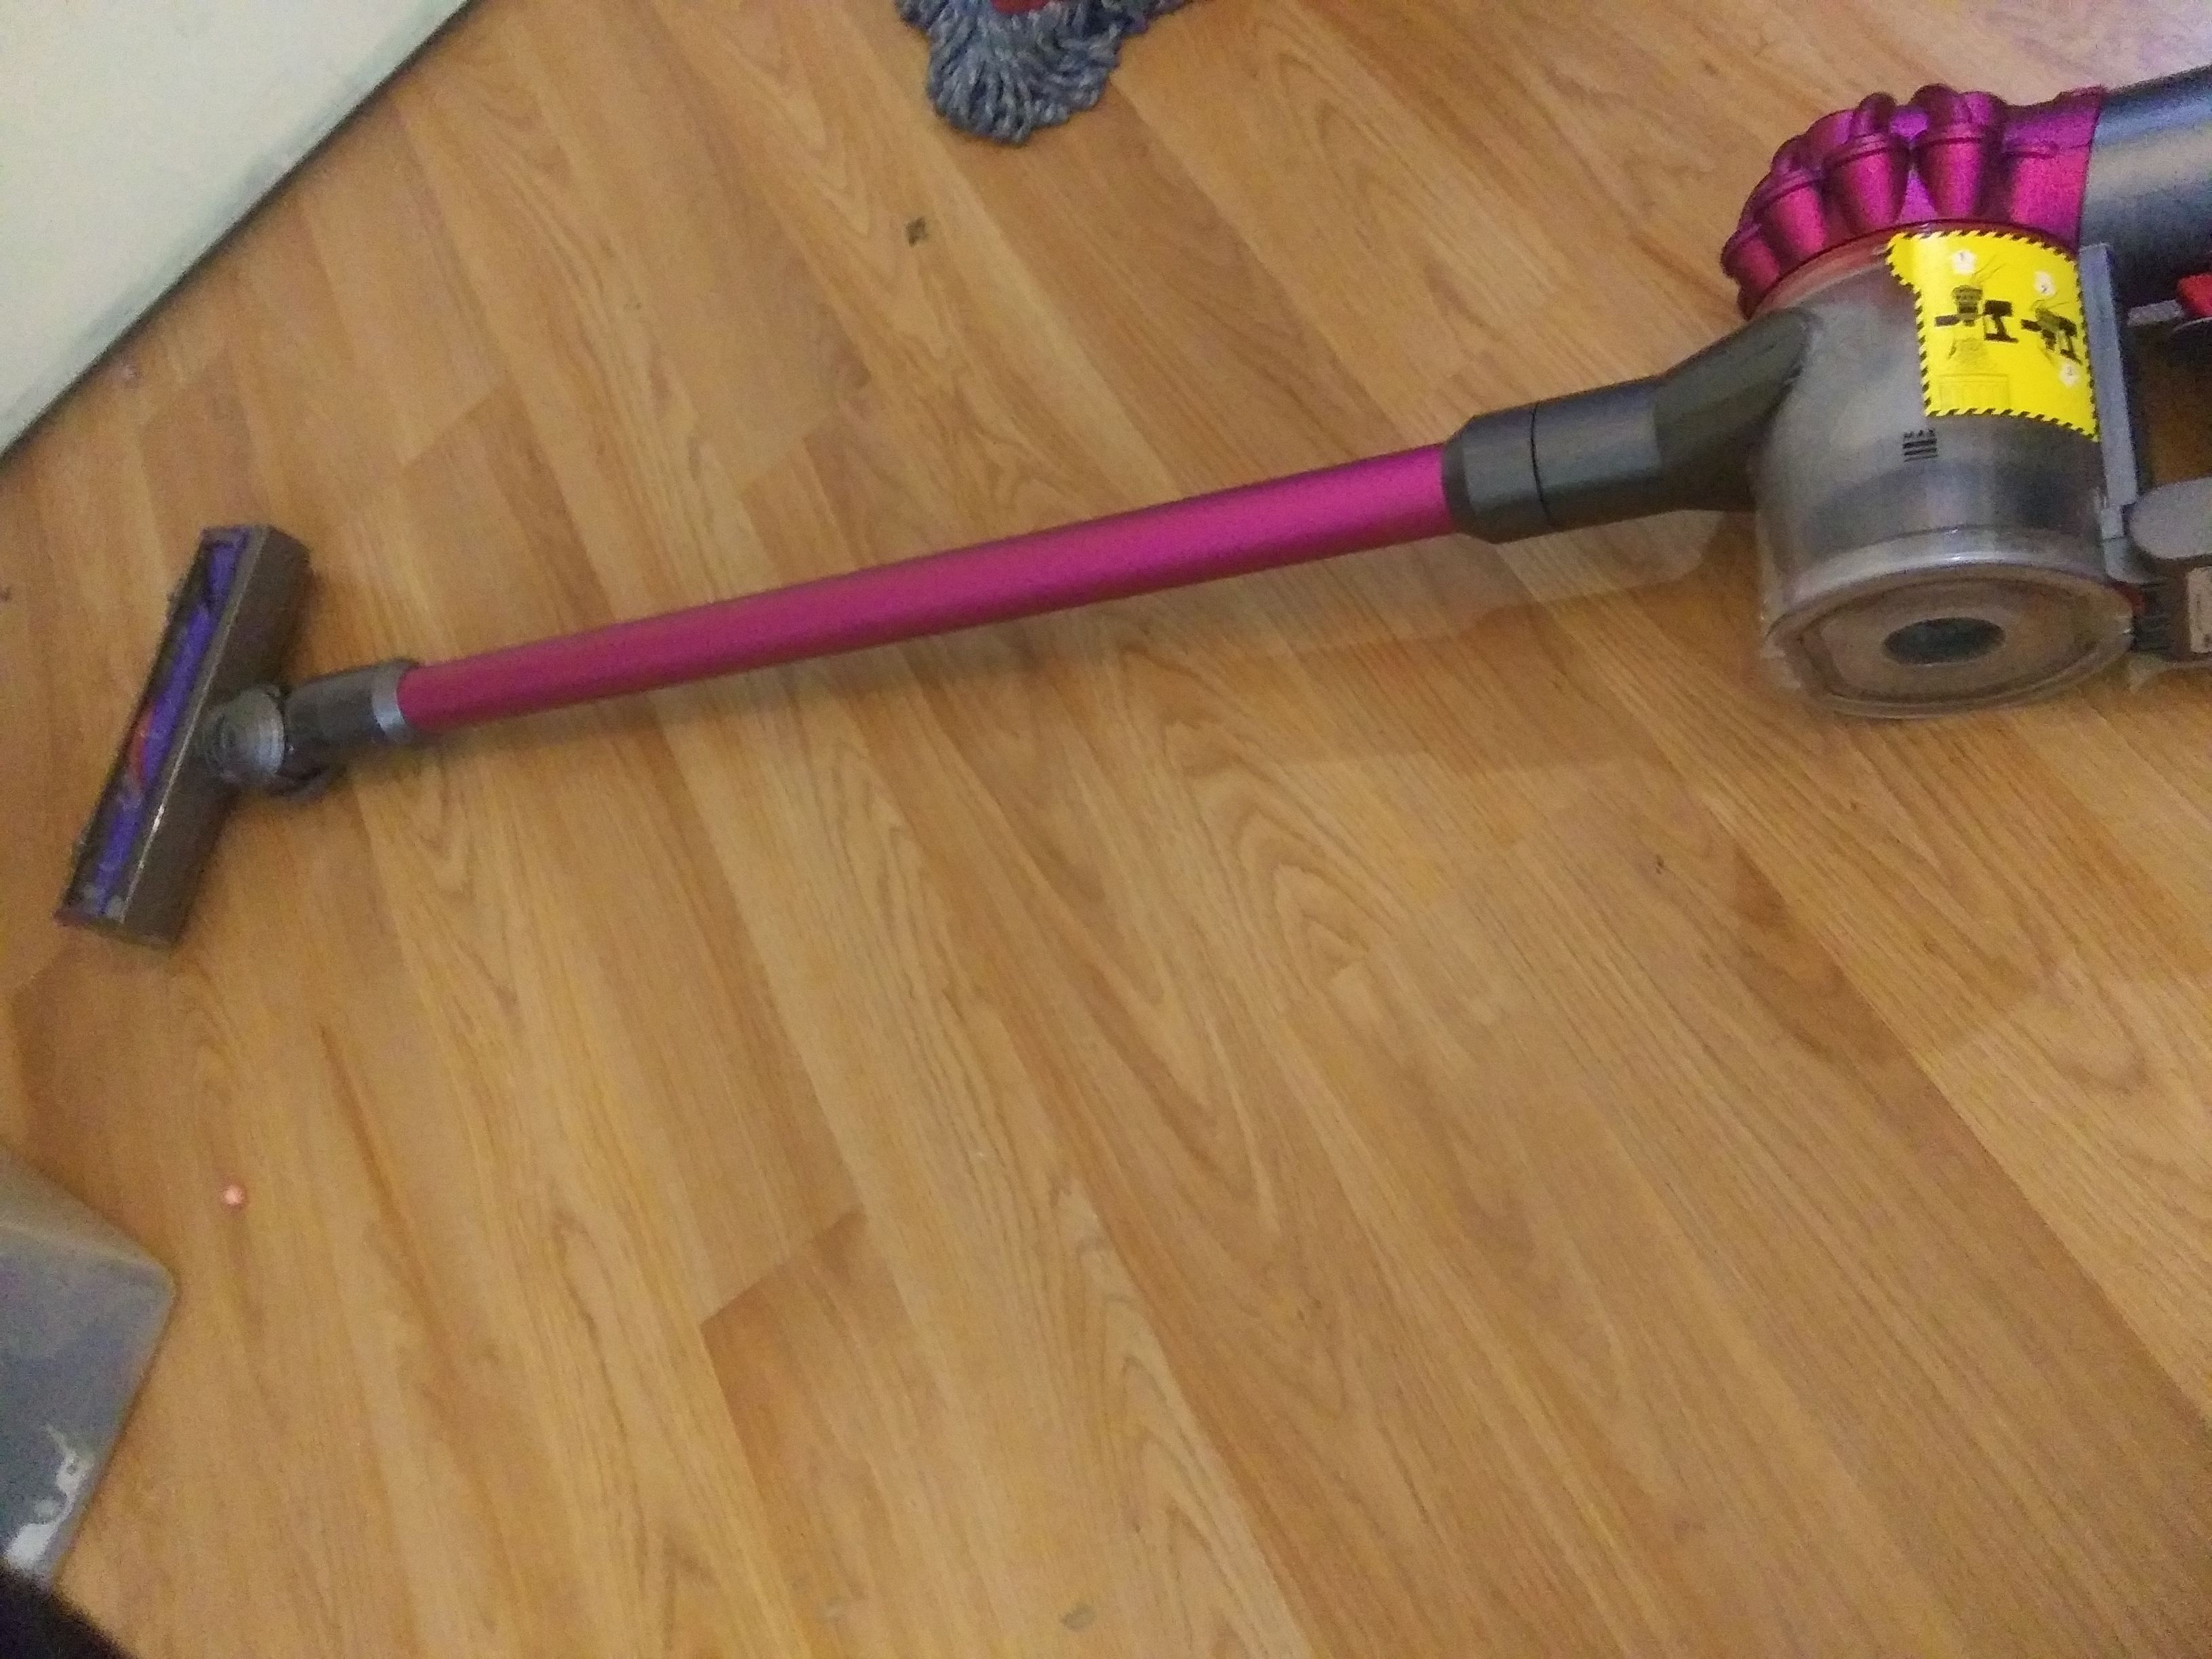 Dyson 2 in 1 handheld and moterhead vacuume